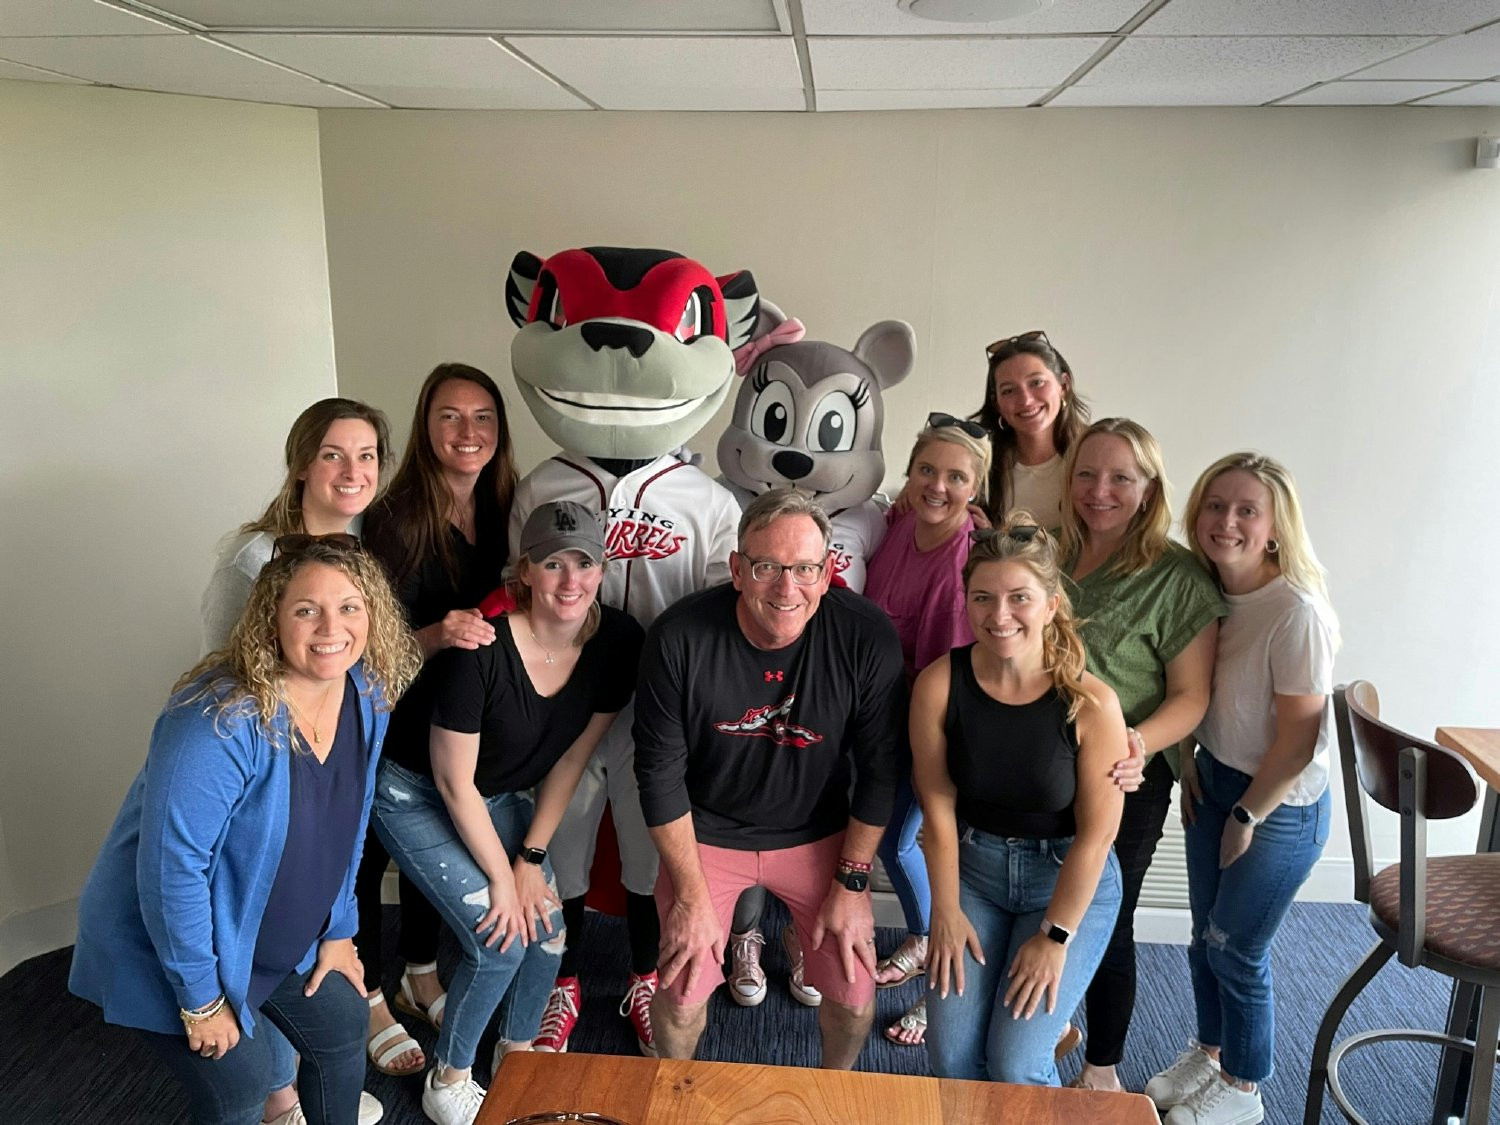 Members of the Marketing and People Strategies teams cheering on the Richmond Flying Squirrels baseball team.